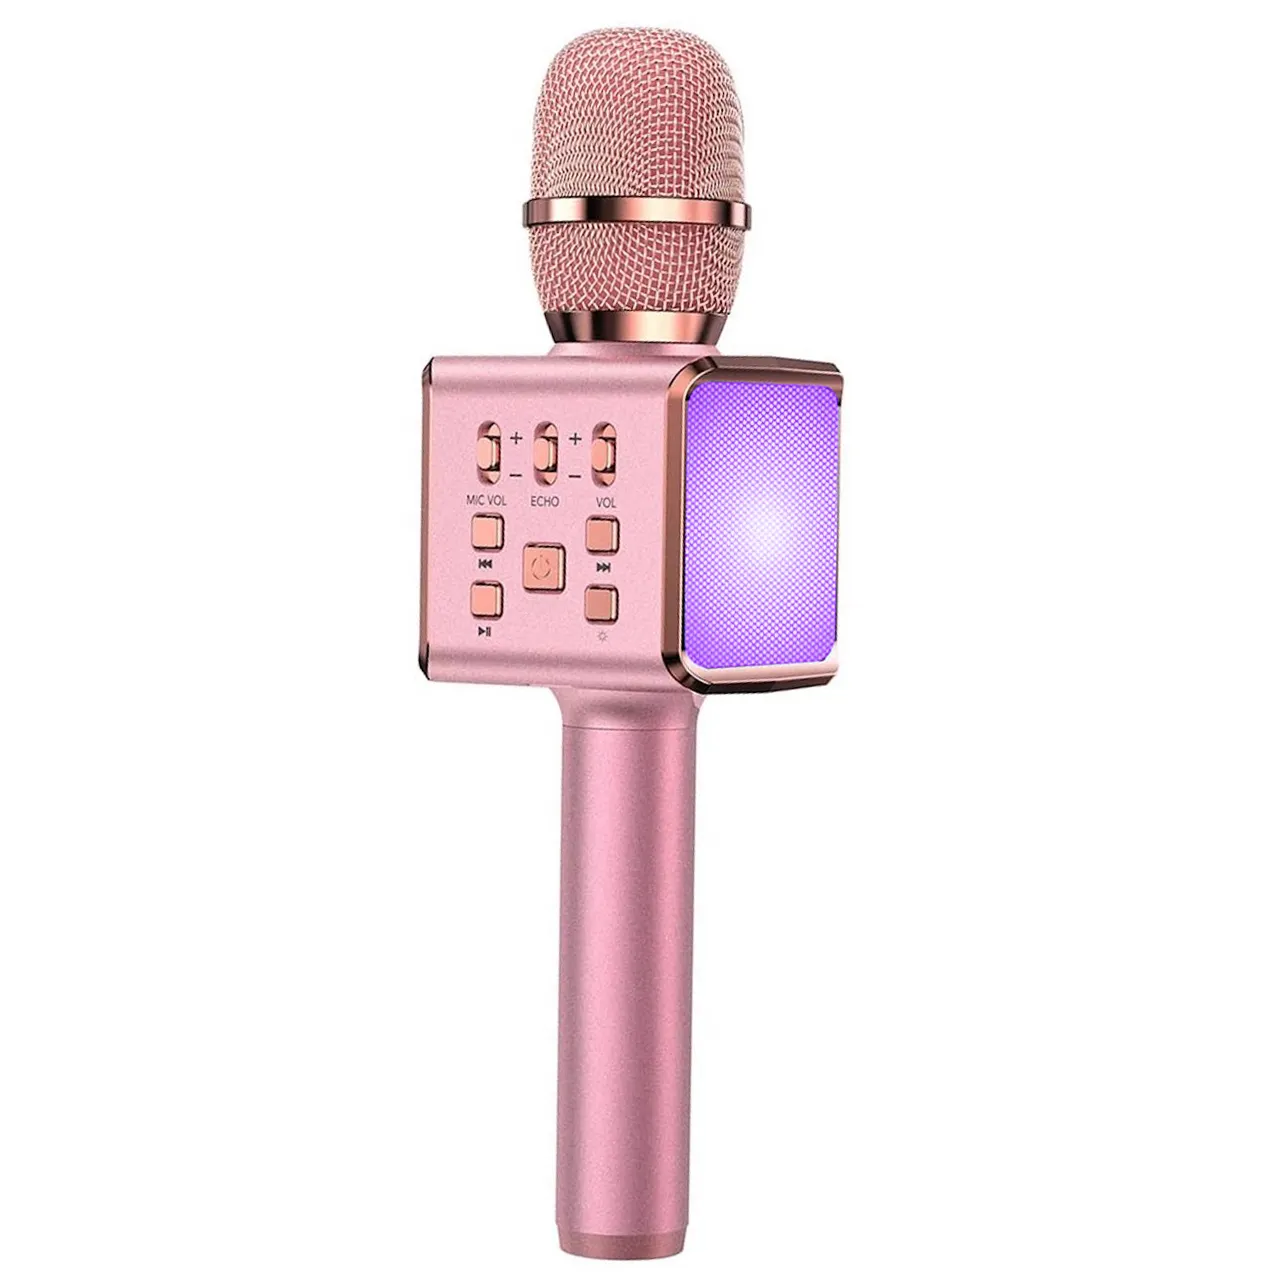 Customized Karaoke Microphone Blue-tooth Portable Wireless Home Party Singing Machine Speaker Record For Kids Microfon